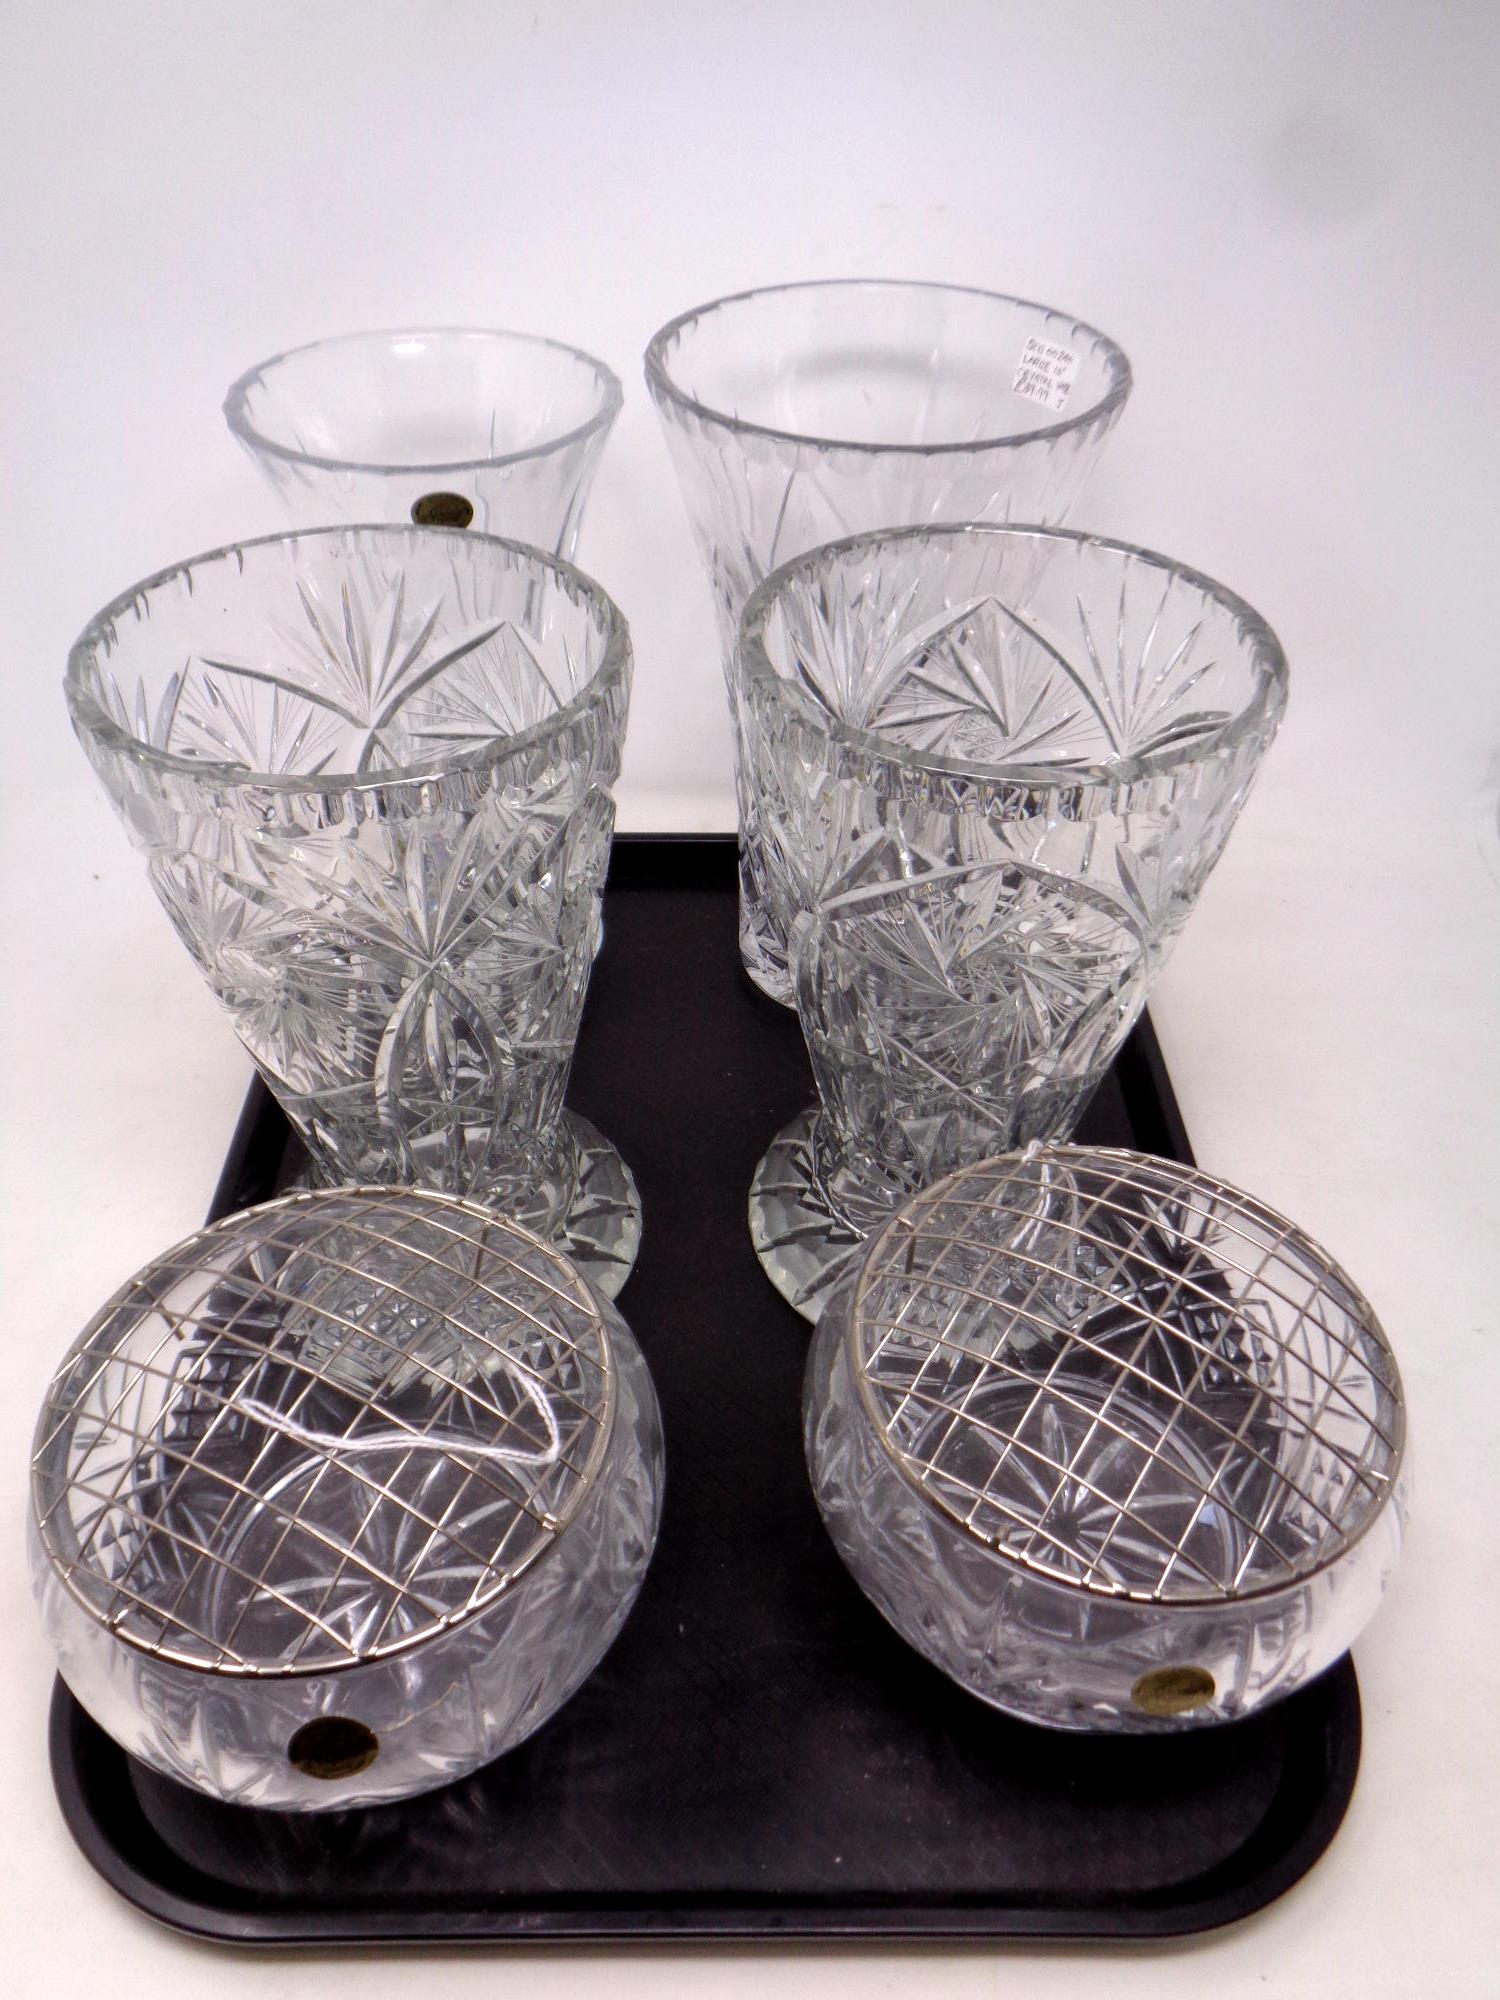 A tray containing a pair of French crystal rose bowls together with four further cut glass lead